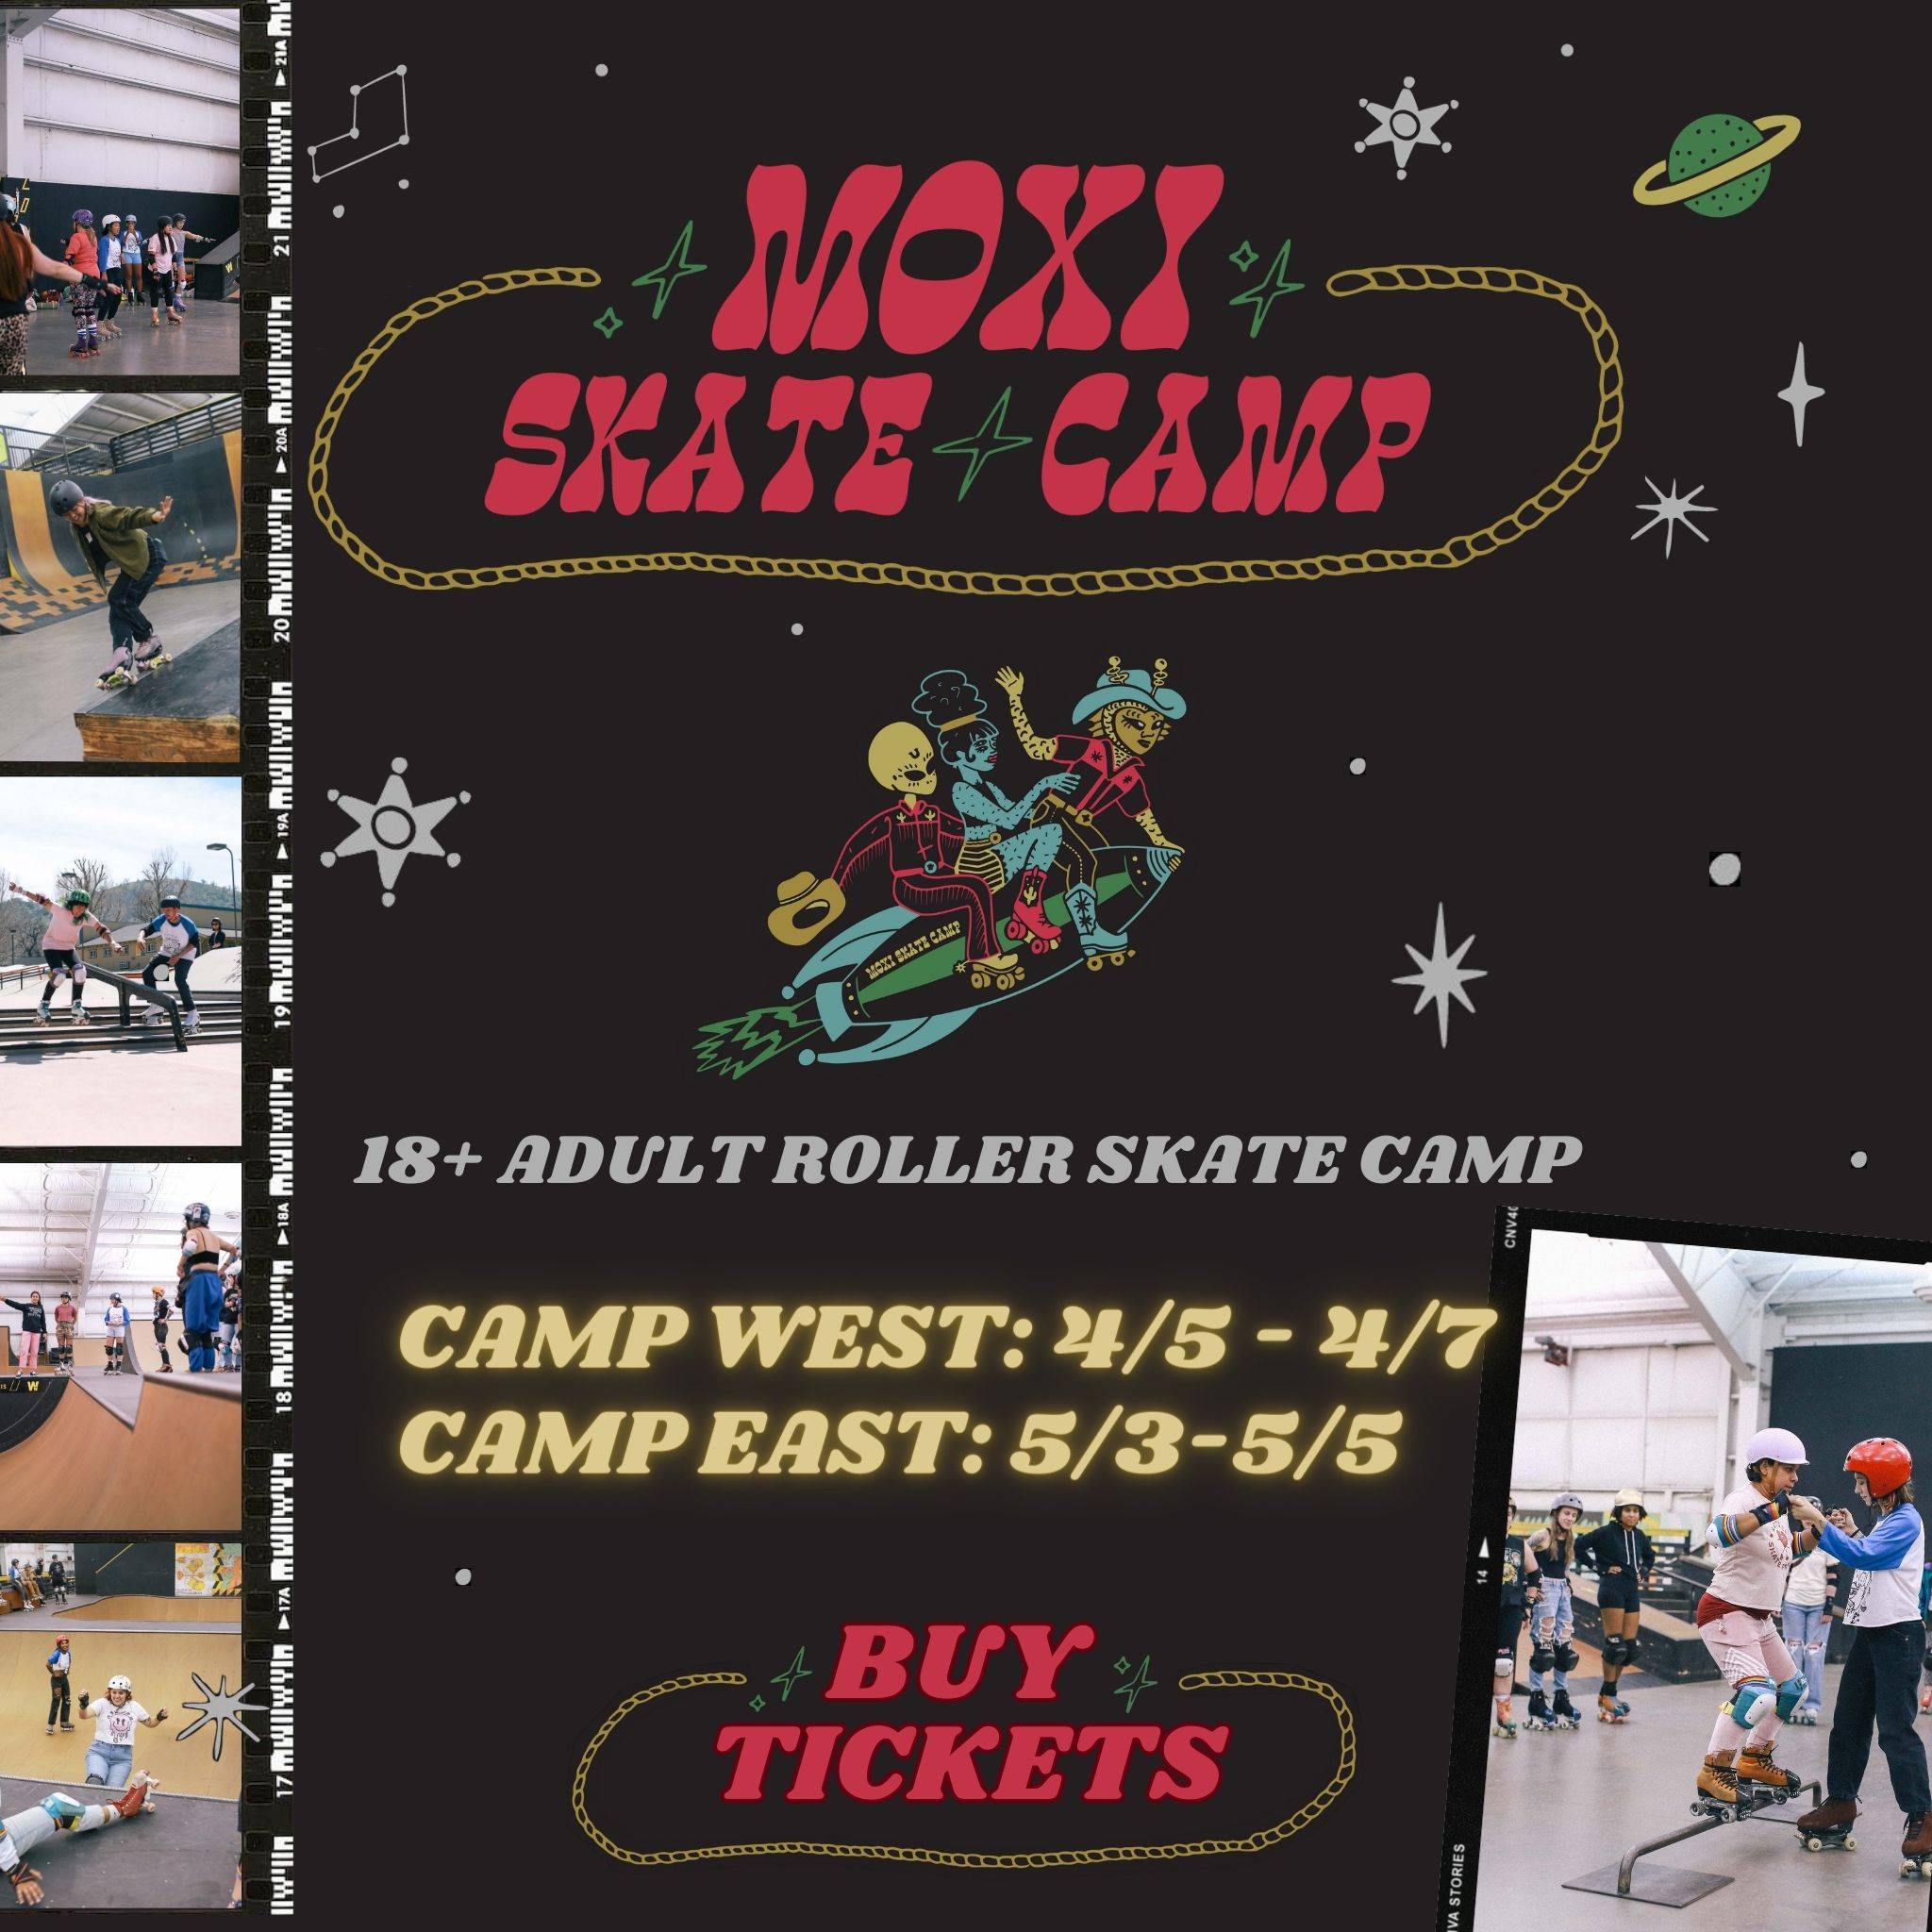 Moxi Skate Camp. 18+ adult roller skate camp. Camp West: April 5 to April 7. Camp East: May 3 to May 5. Get tickets